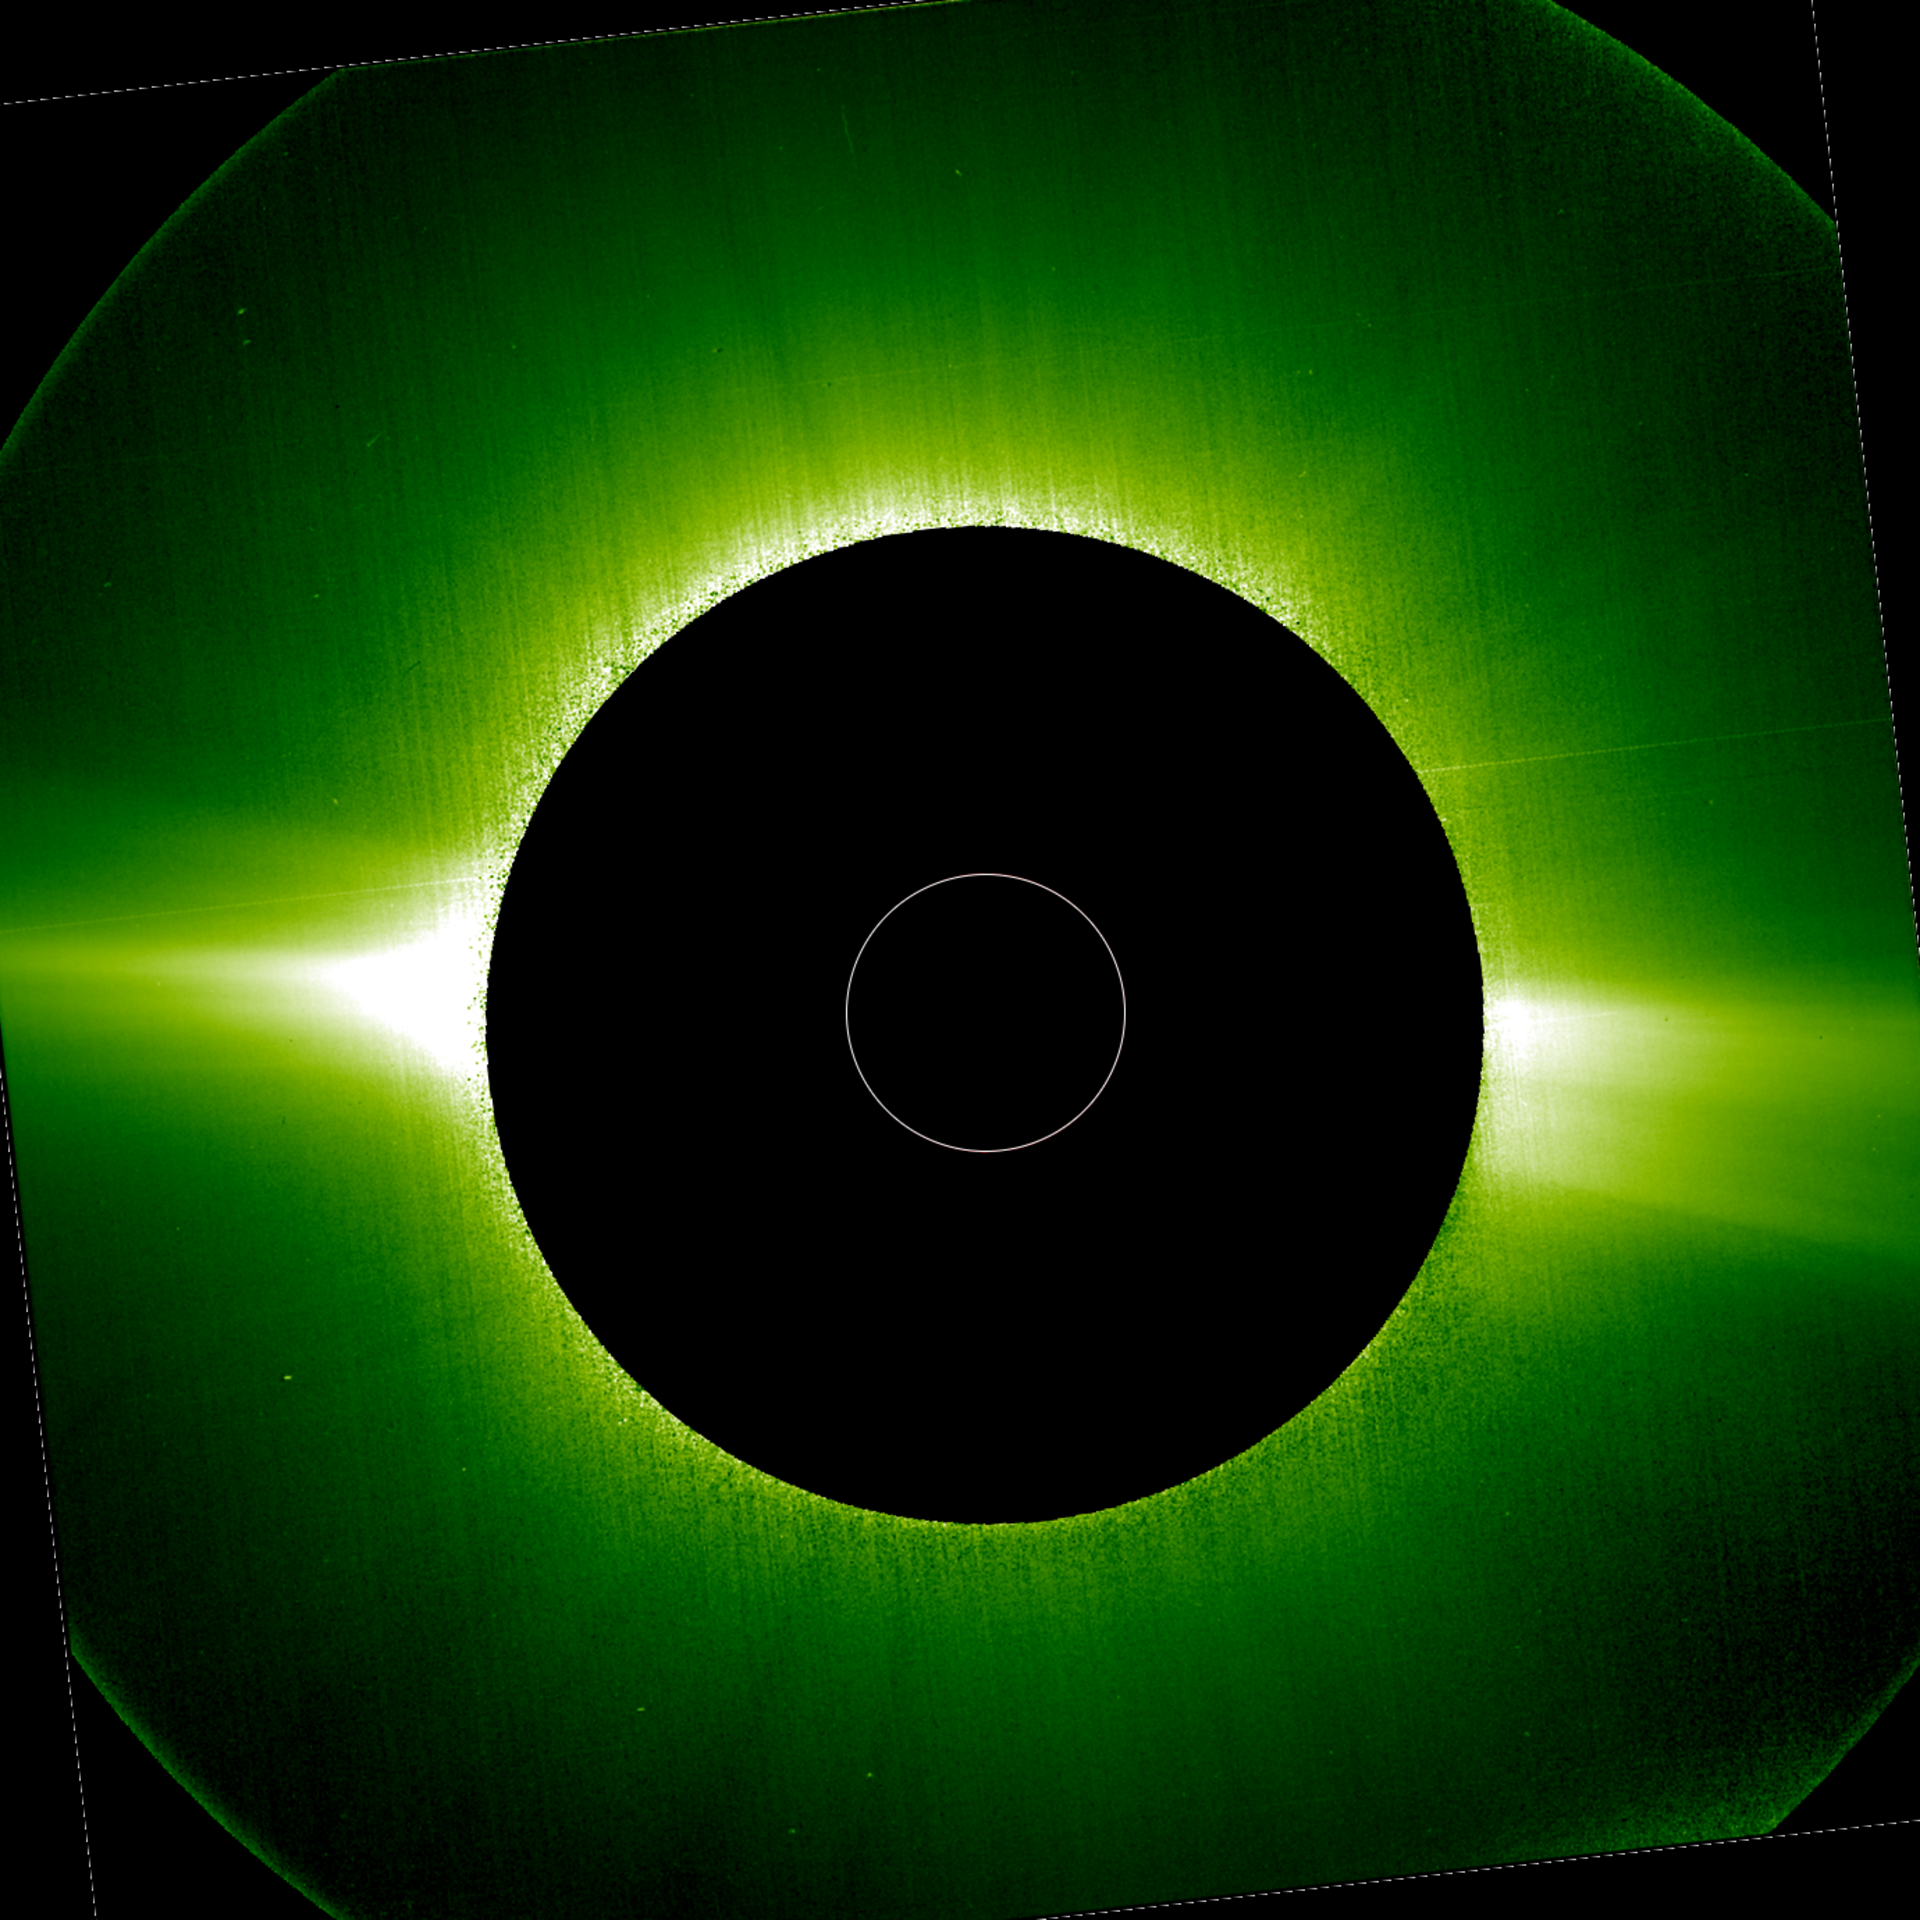 The Sun’s corona in visible light on 15 May 2020